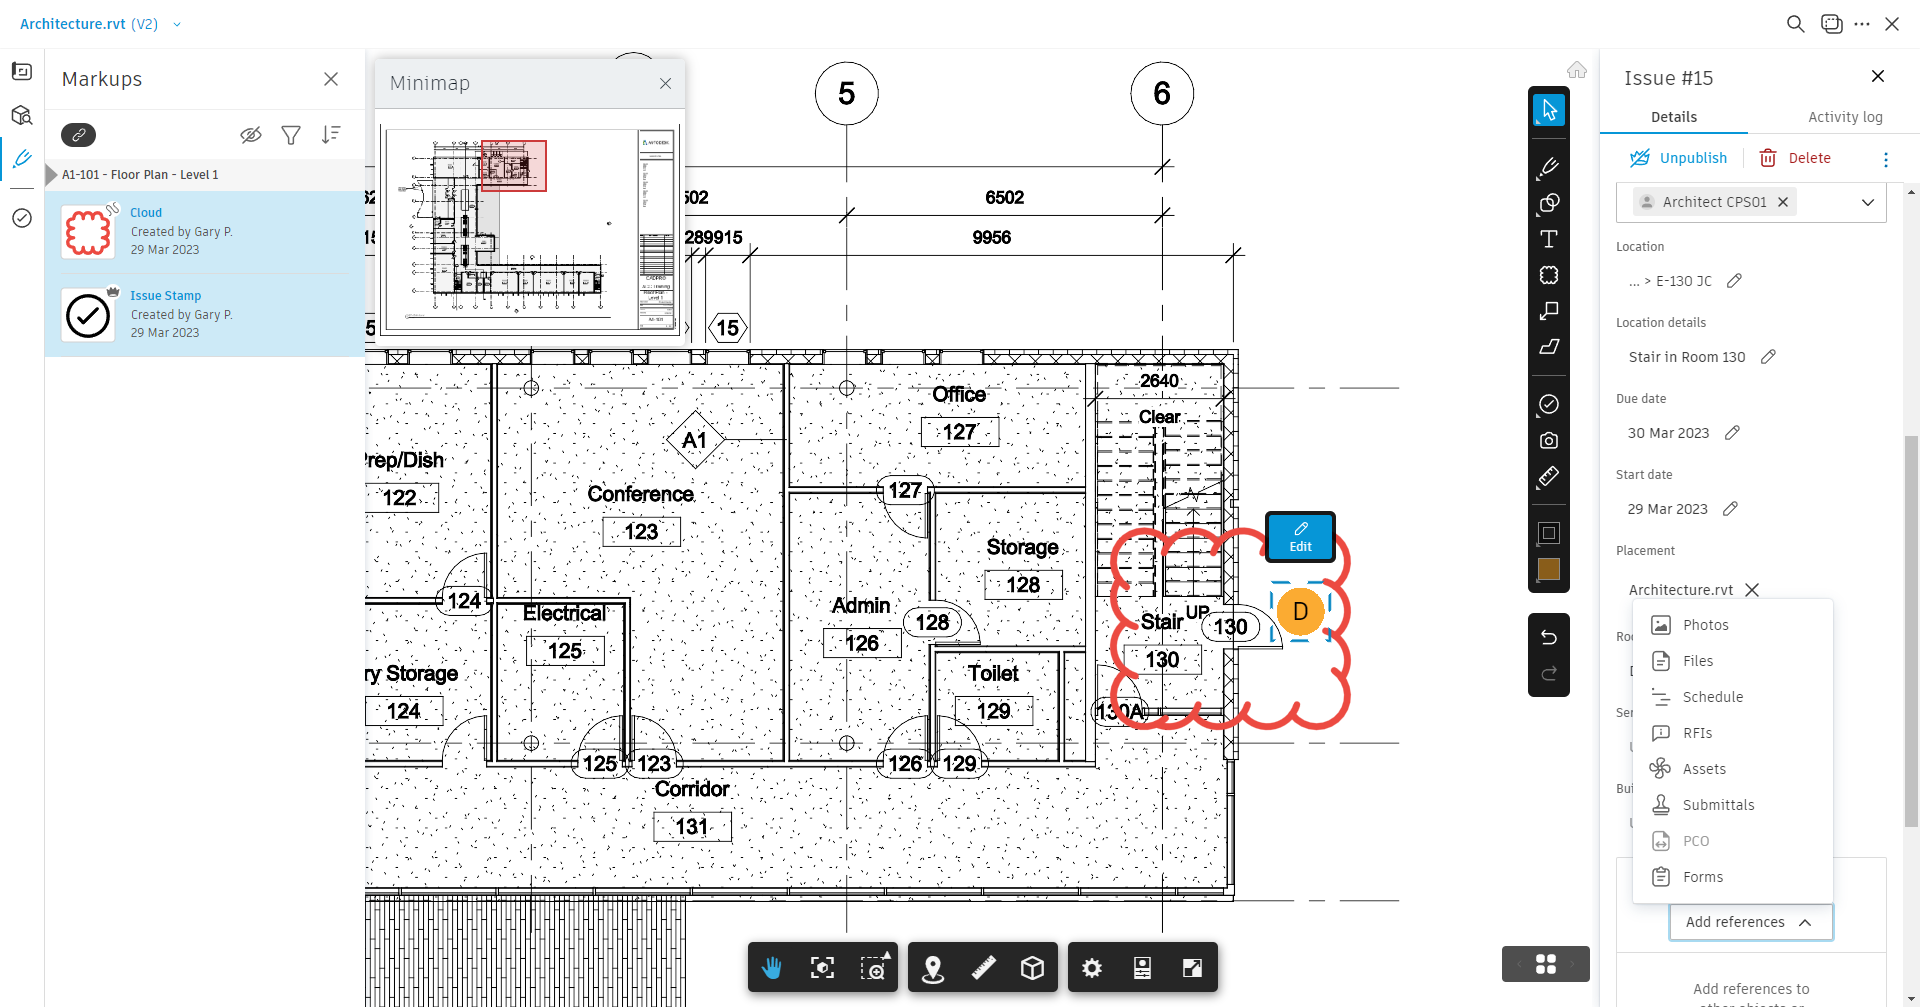 2d architectecural drawing in autodesk docs software